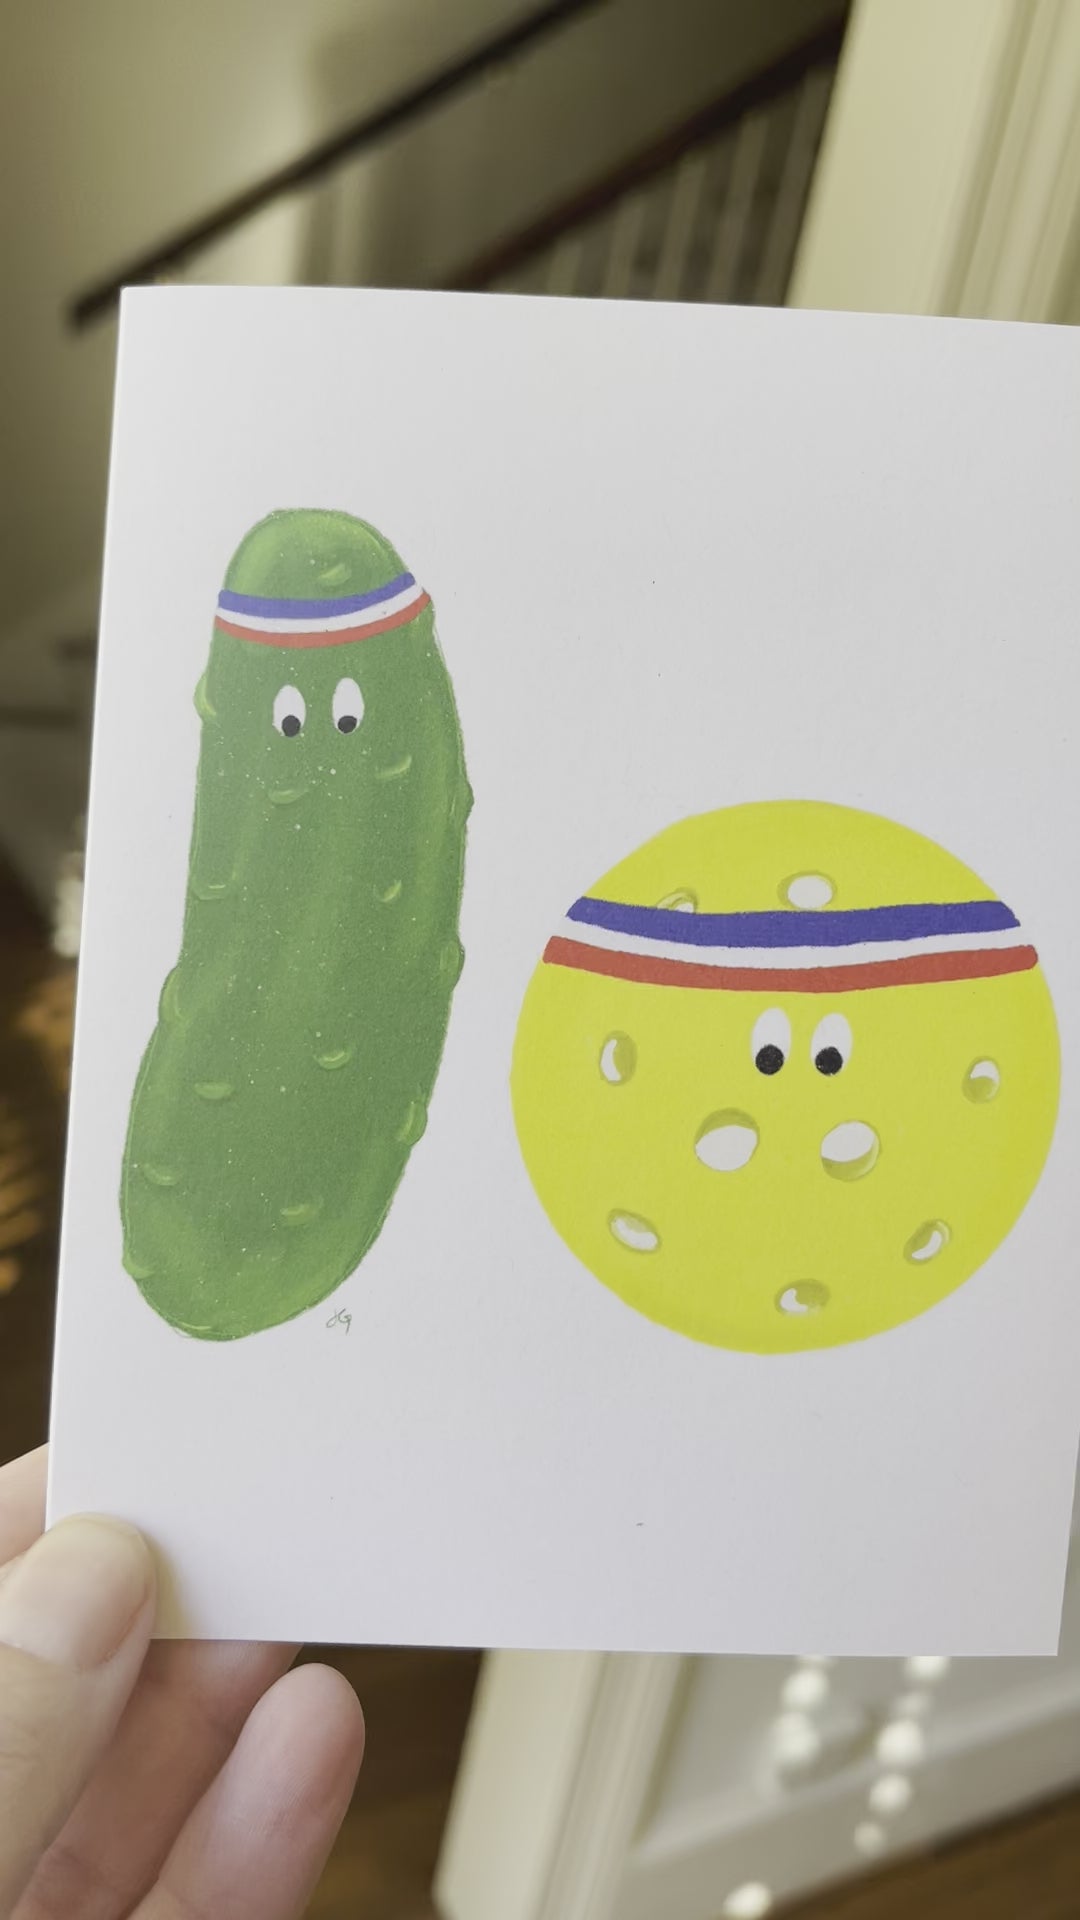 greeting card with a pickle and a ball with sweatbands around their hands. A pun on pickle ball